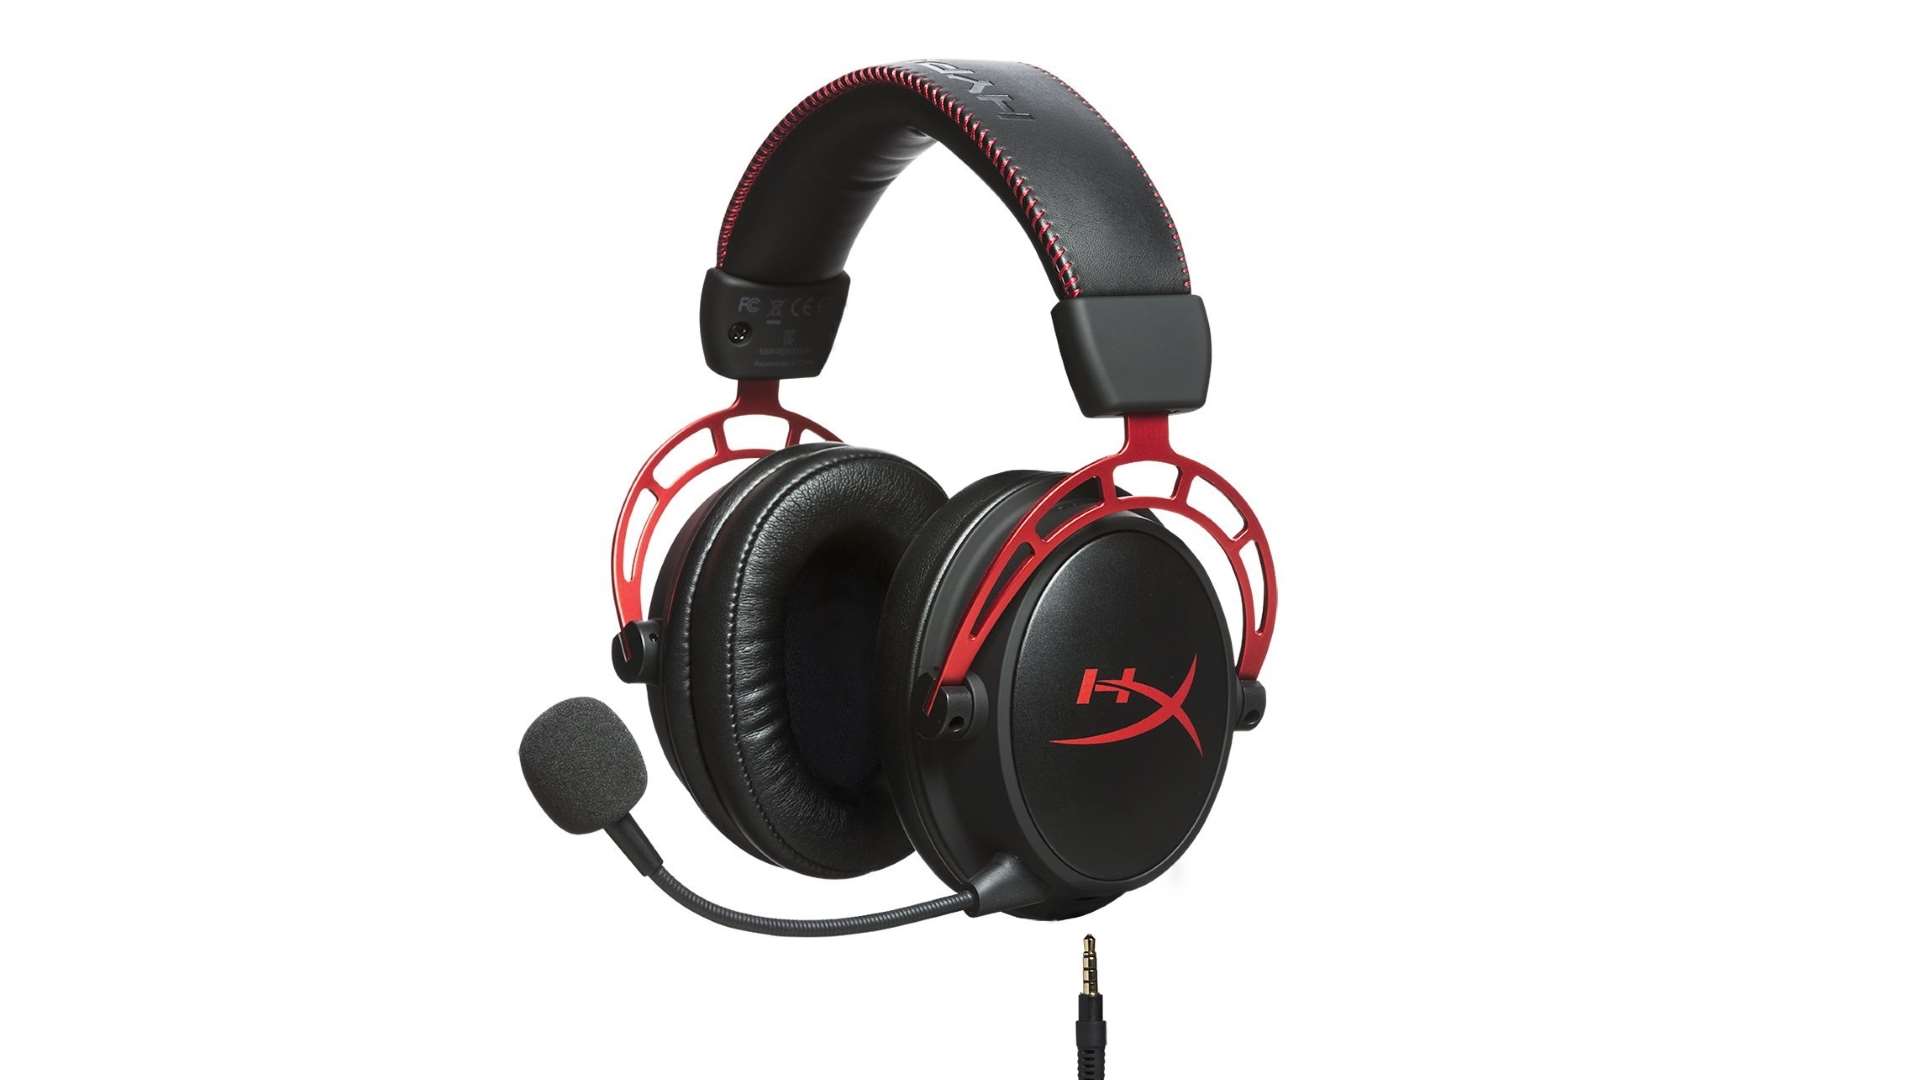 The HyperX Cloud Alpha gaming headset is up to 33% cheaper